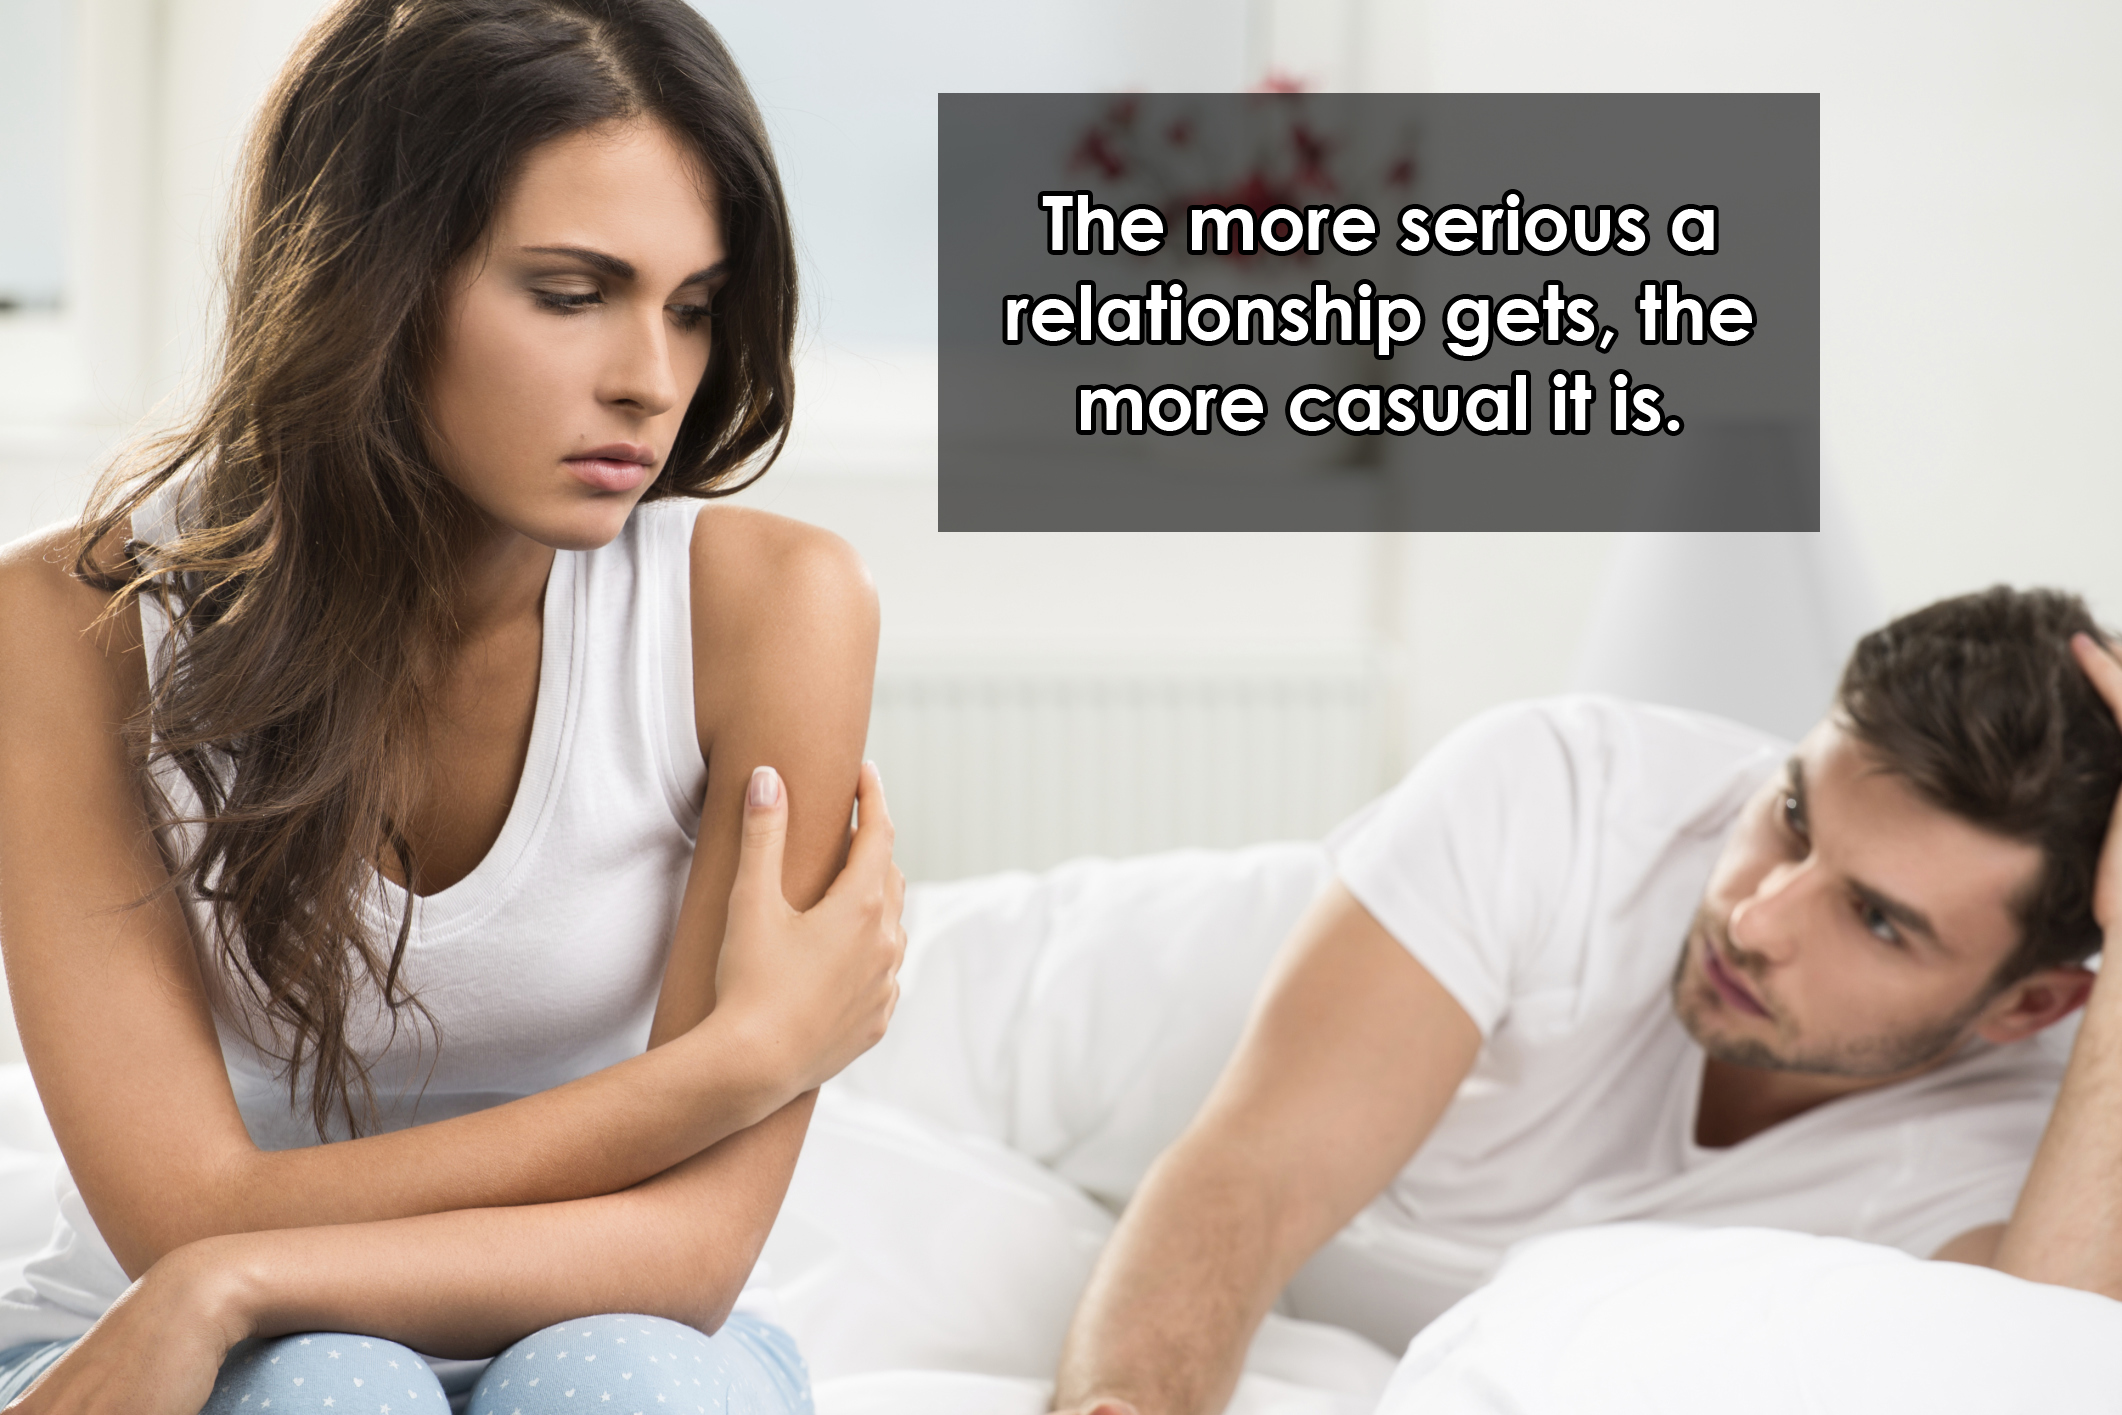 delayed pregnancy - The more serious a relationship gets, the more casual it is.